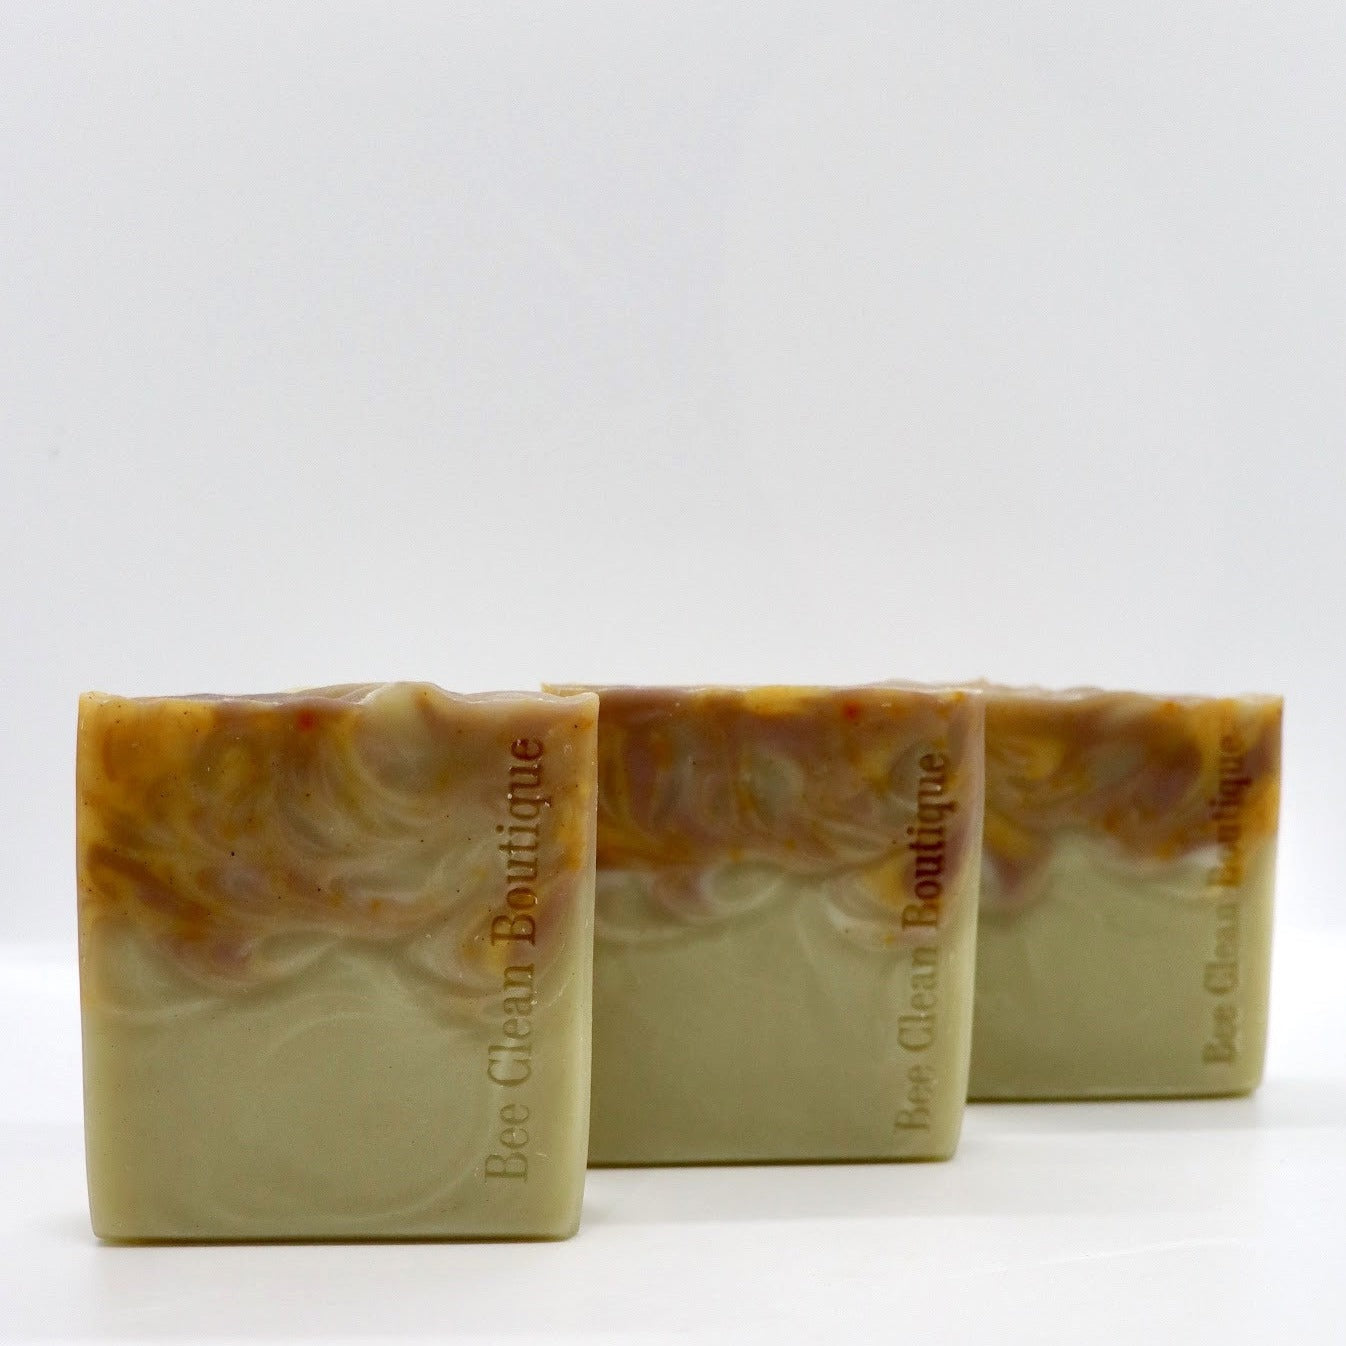 3 bars of orange patchouli handmade soap on display on white surface